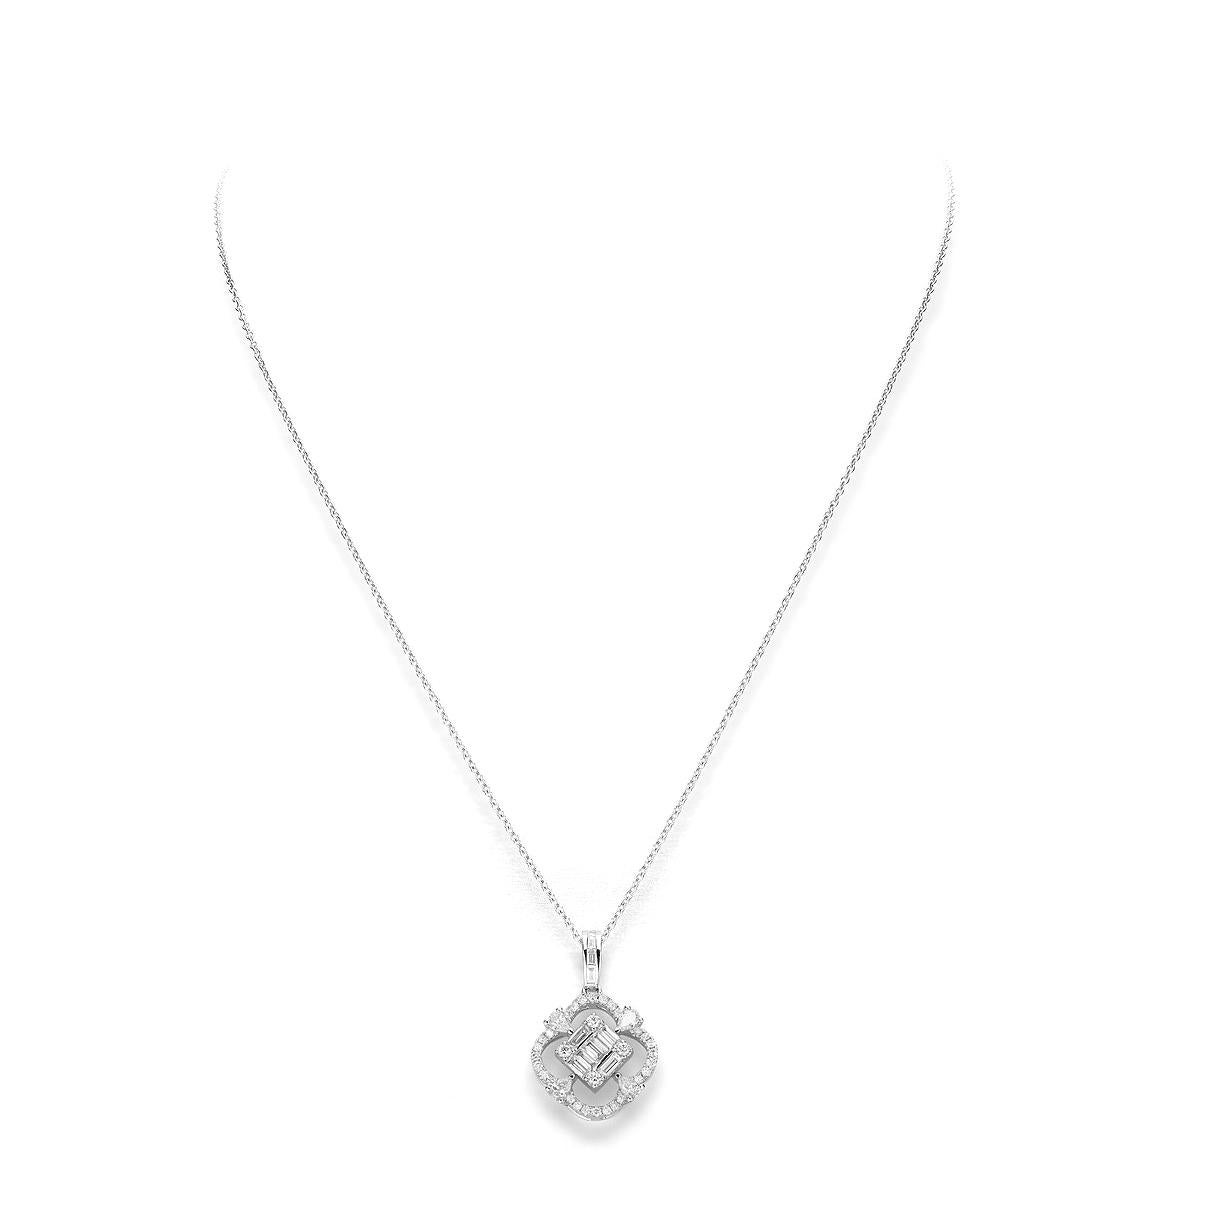 Pendant in 18kt white gold set with 32 diamonds 0.28 cts and 11 baguette cut diamonds 0.42 cts and 4 pear.shaped cut diamonds 0.29 cts